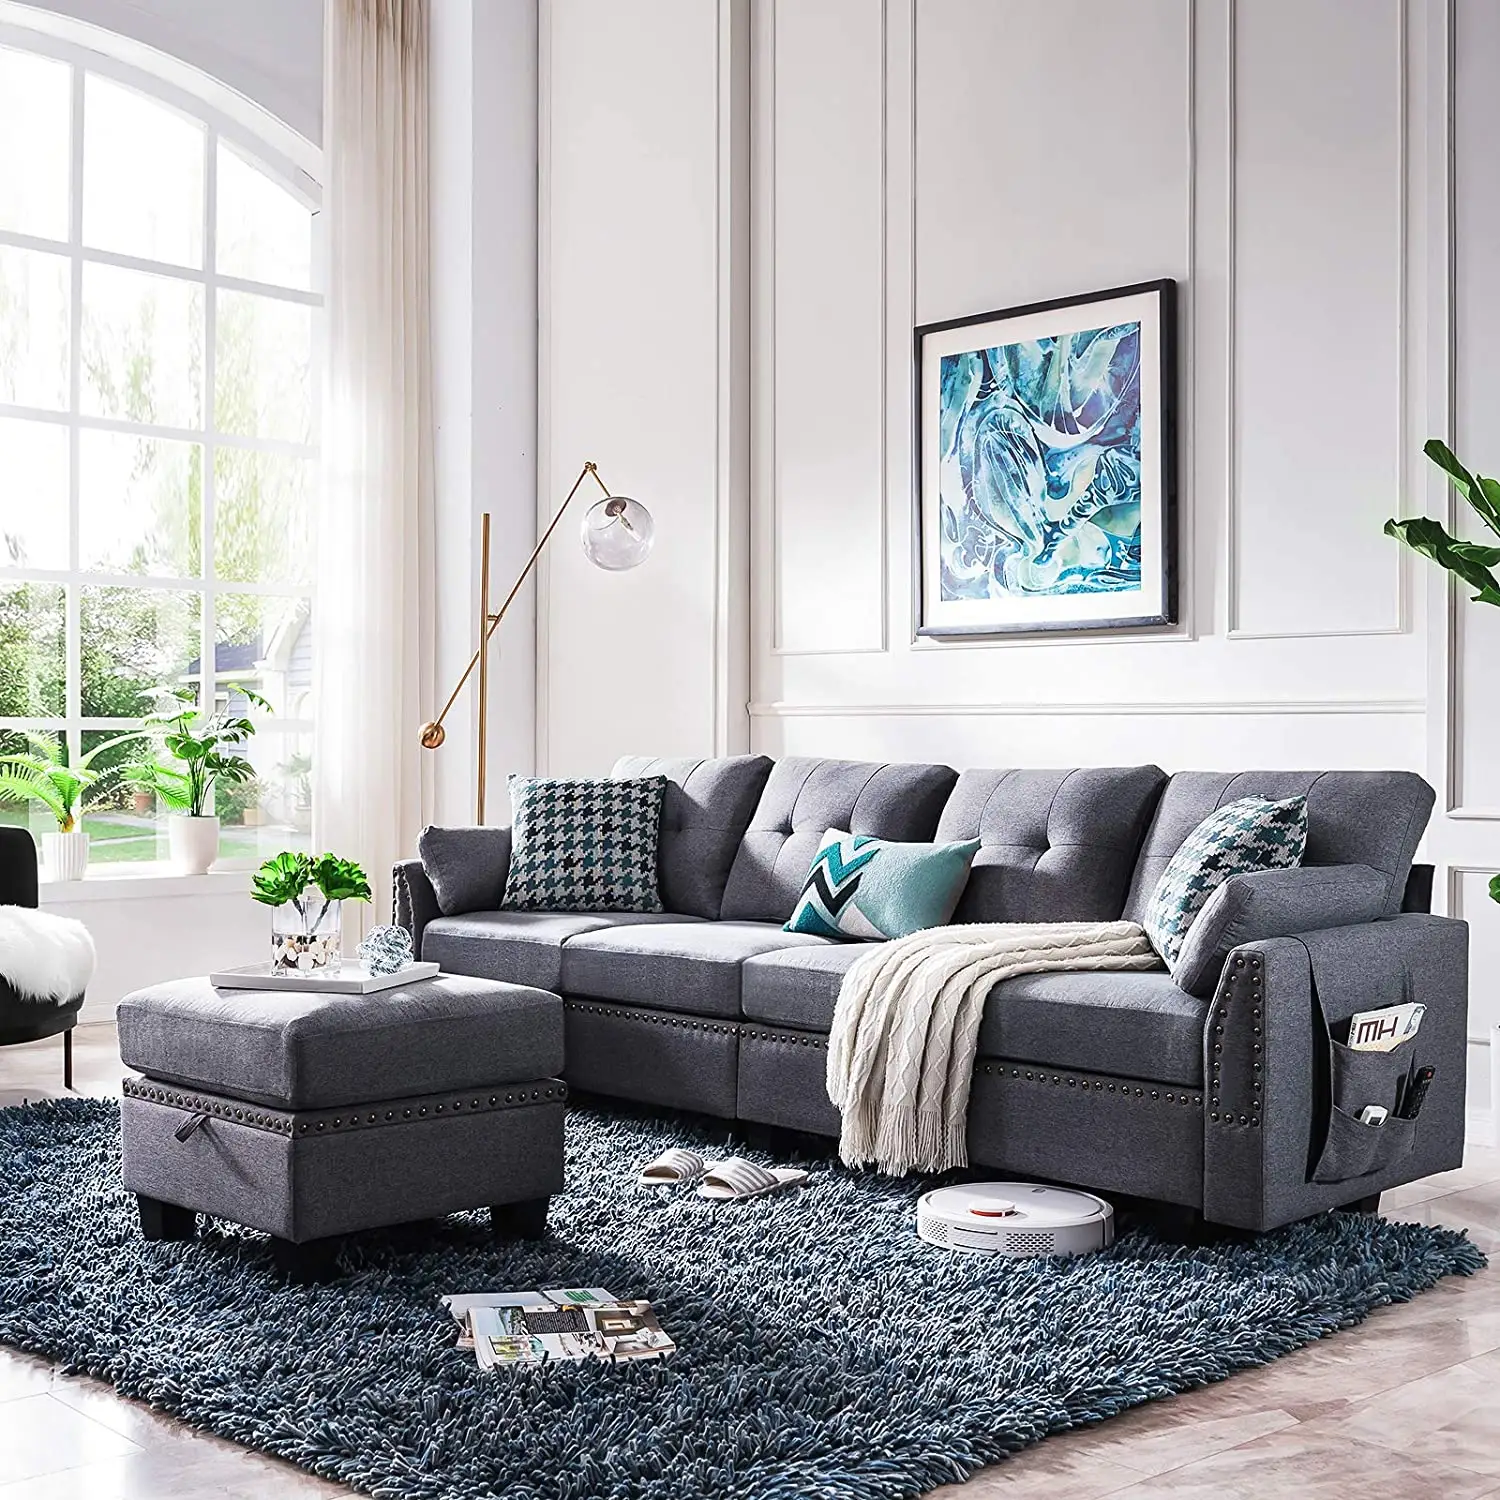 American Style home furniture fabric solid wood frame living room sofa sectional l shape capacity storage sofa